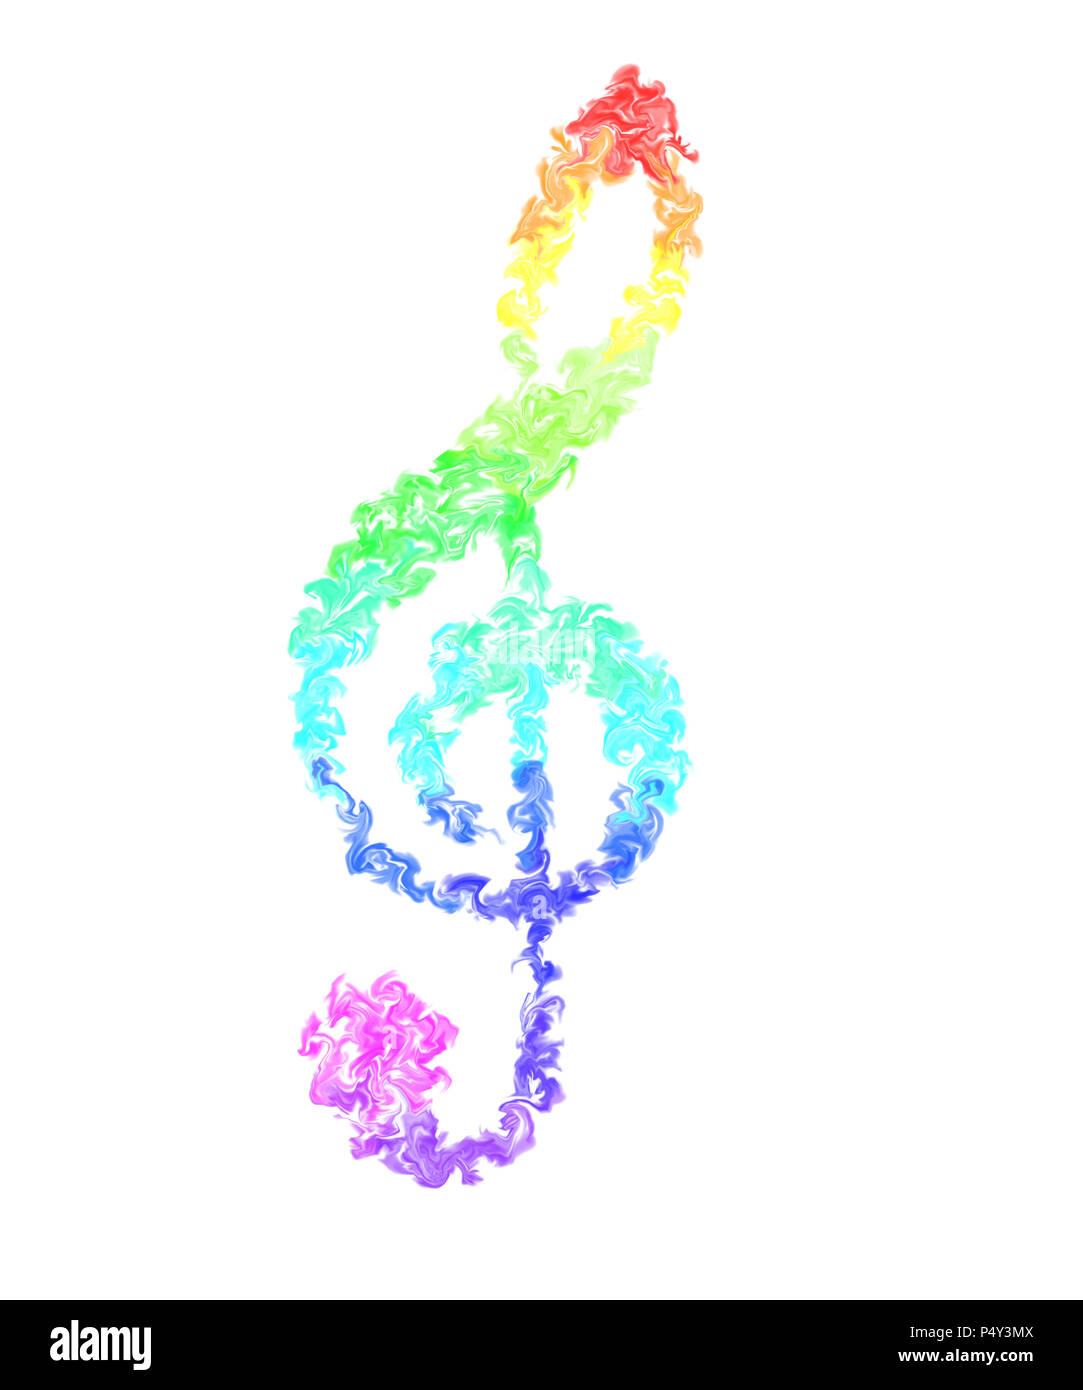 Pulsing Rainbow Color Music Note - Smeared Fire Design Stock Photo